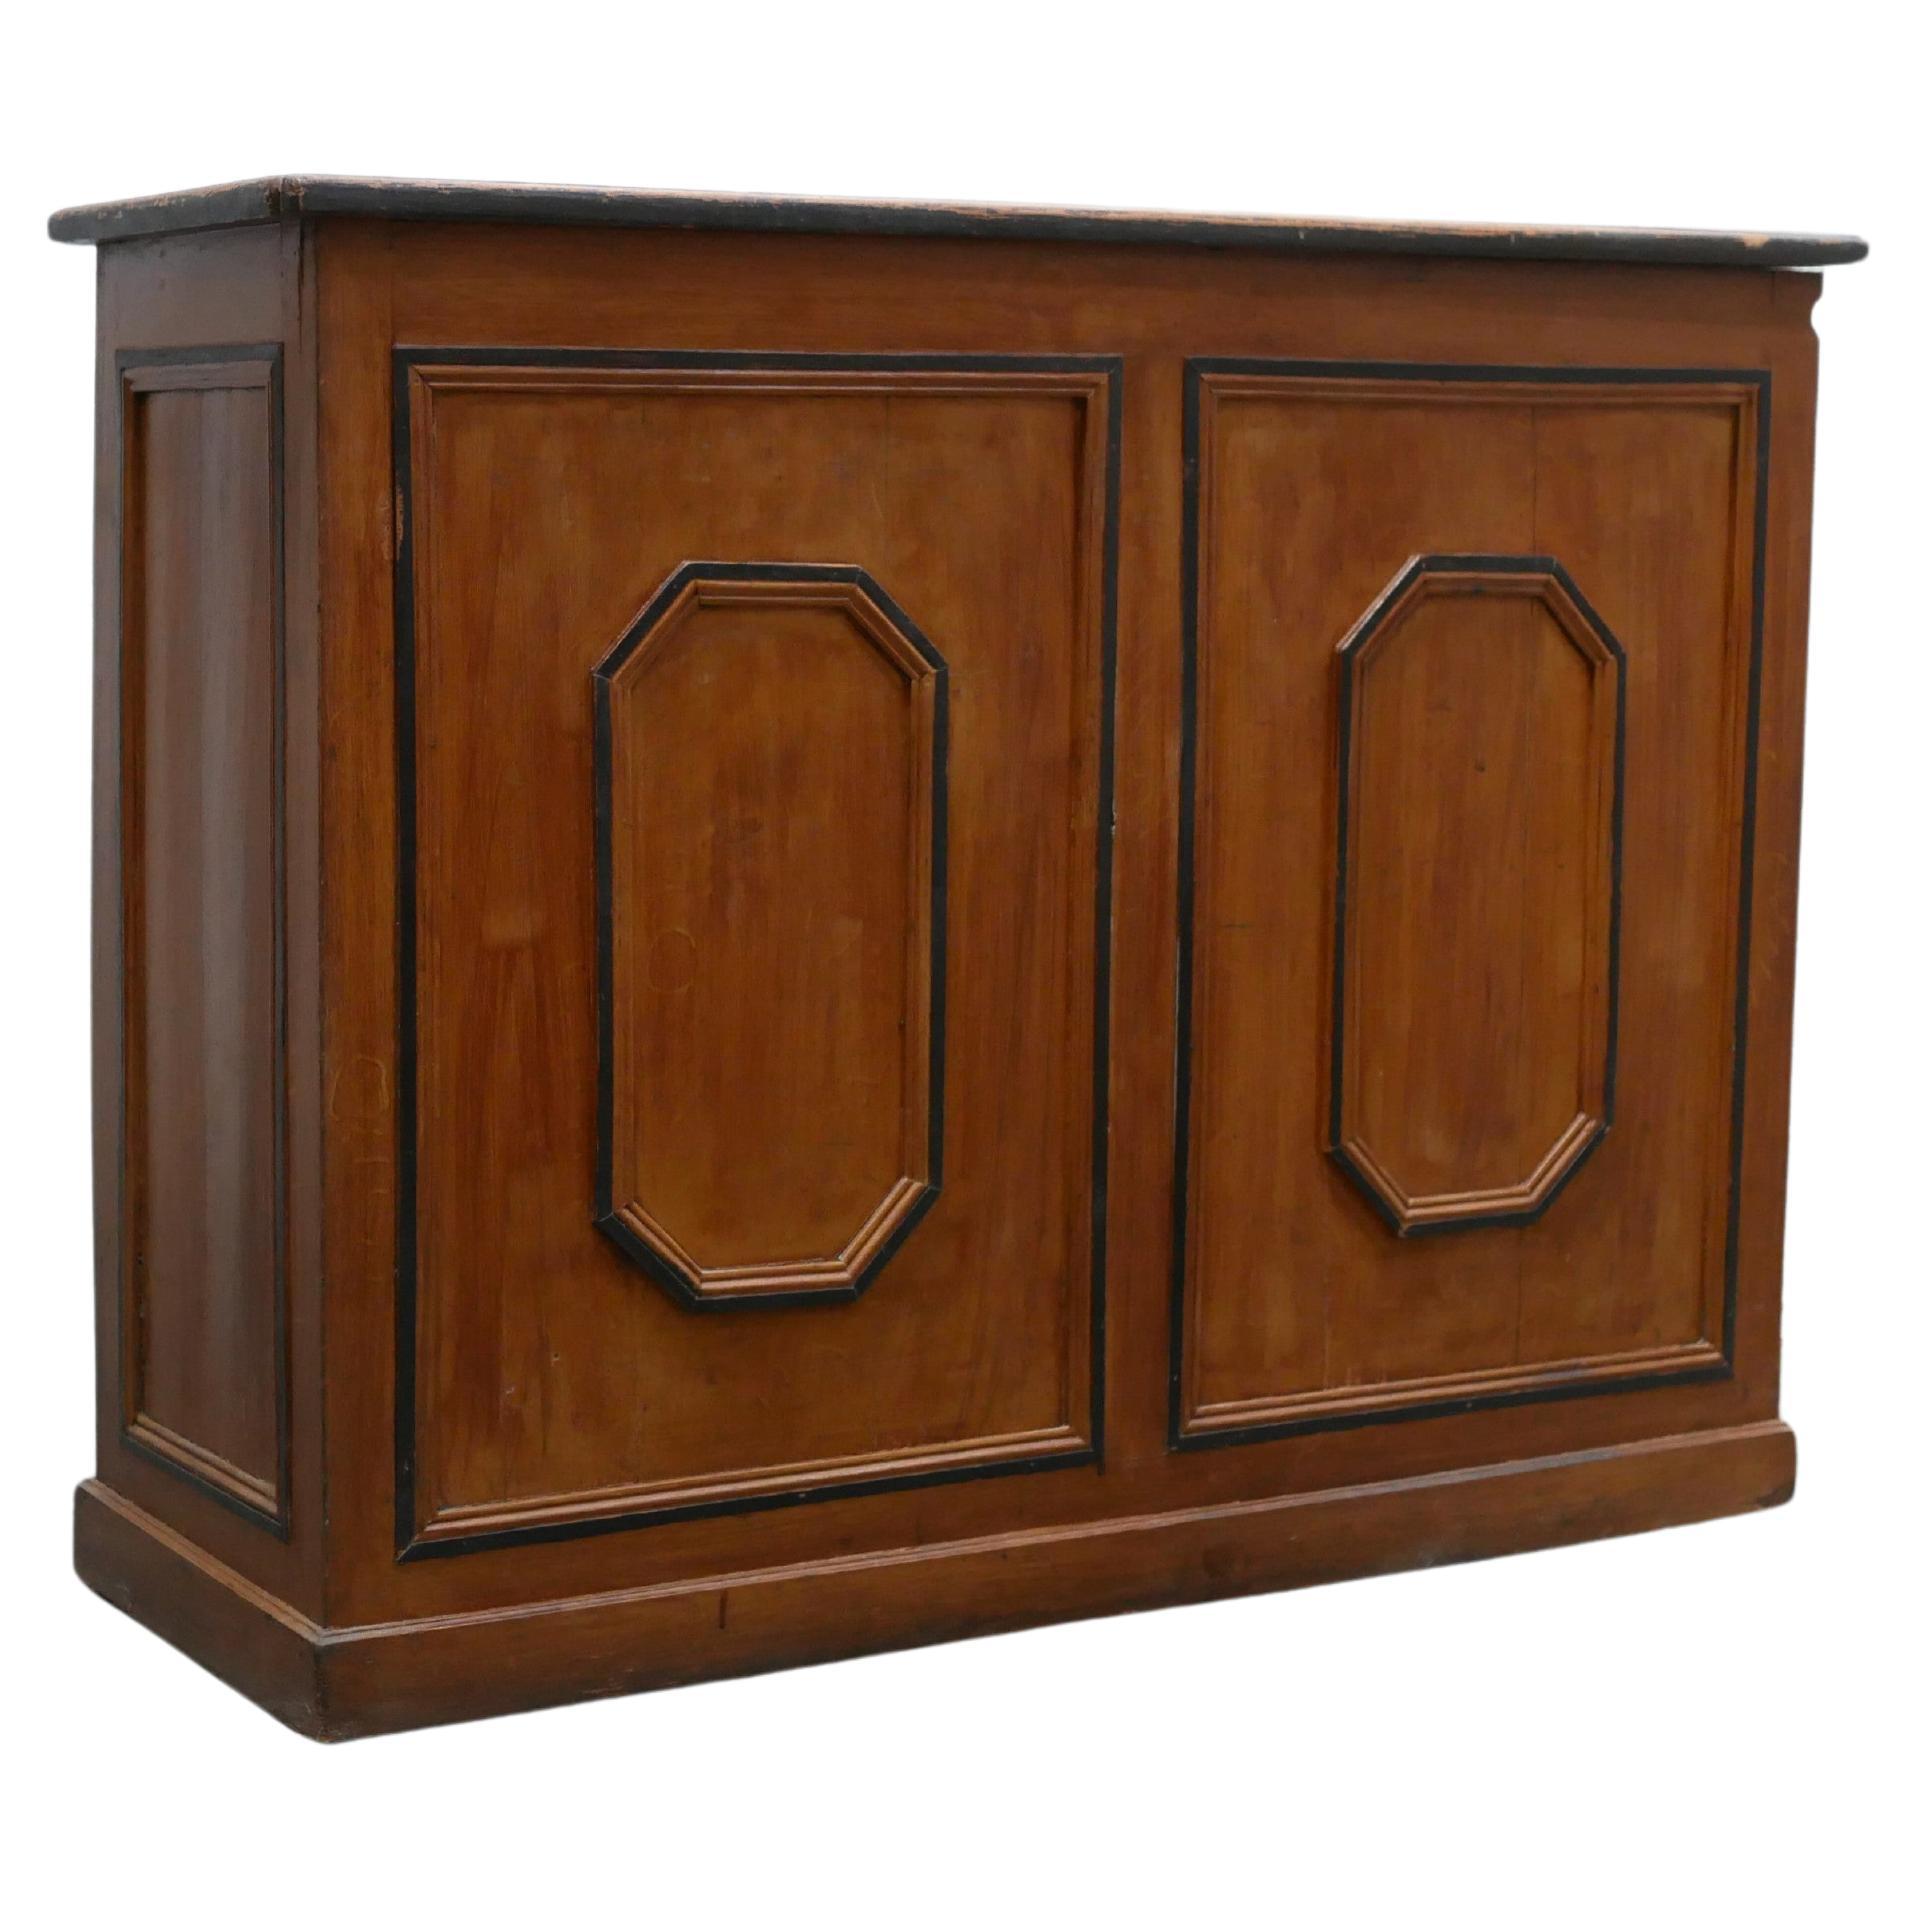 Antique wooden counter trade furniture For Sale